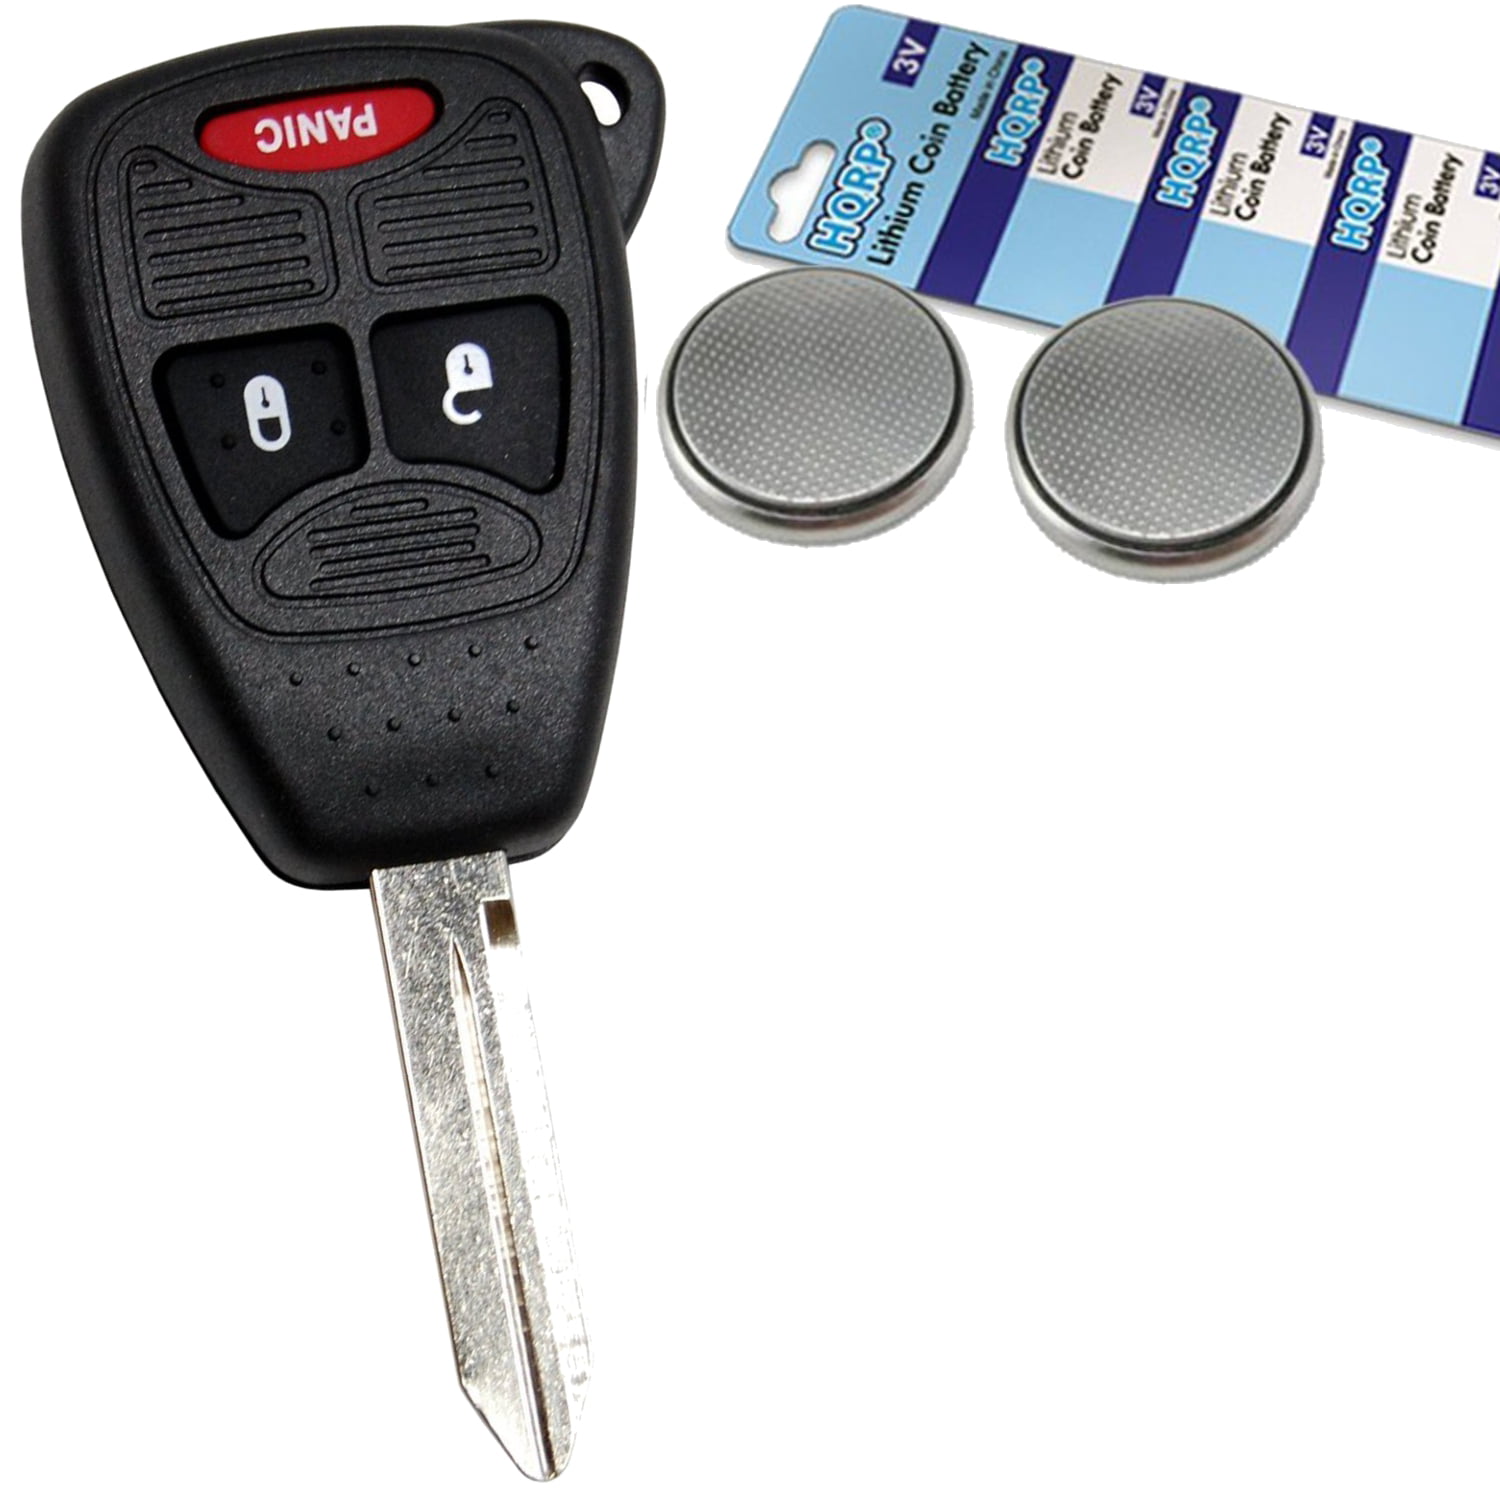 New Key Fob Remote Shell Case For a 2007 Jeep Compass w/ Remote Start 